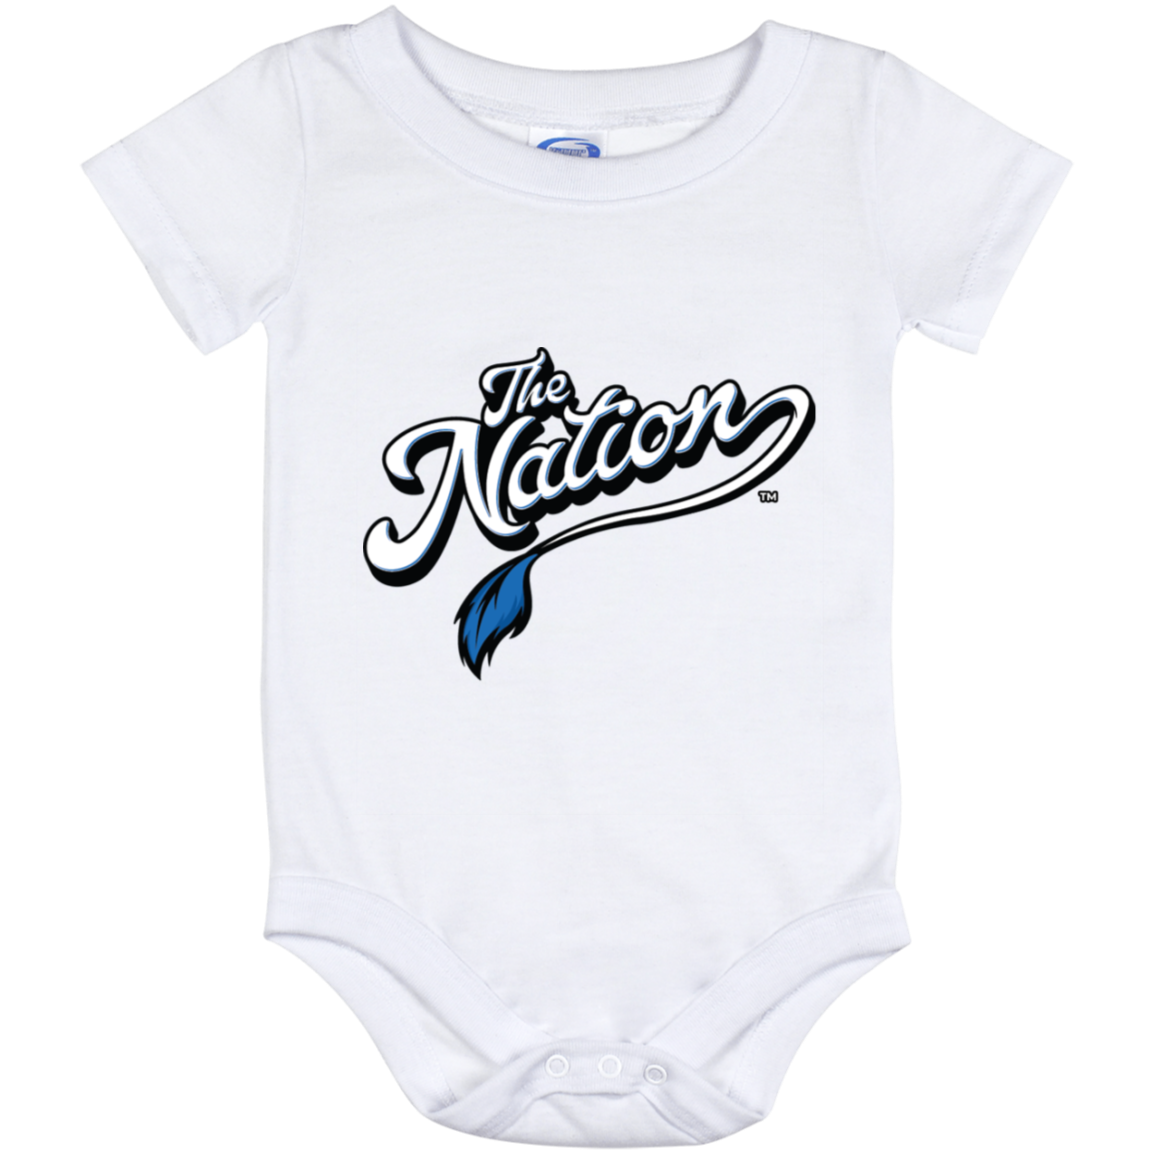 The Nation™ 12 Month Baby Onesie